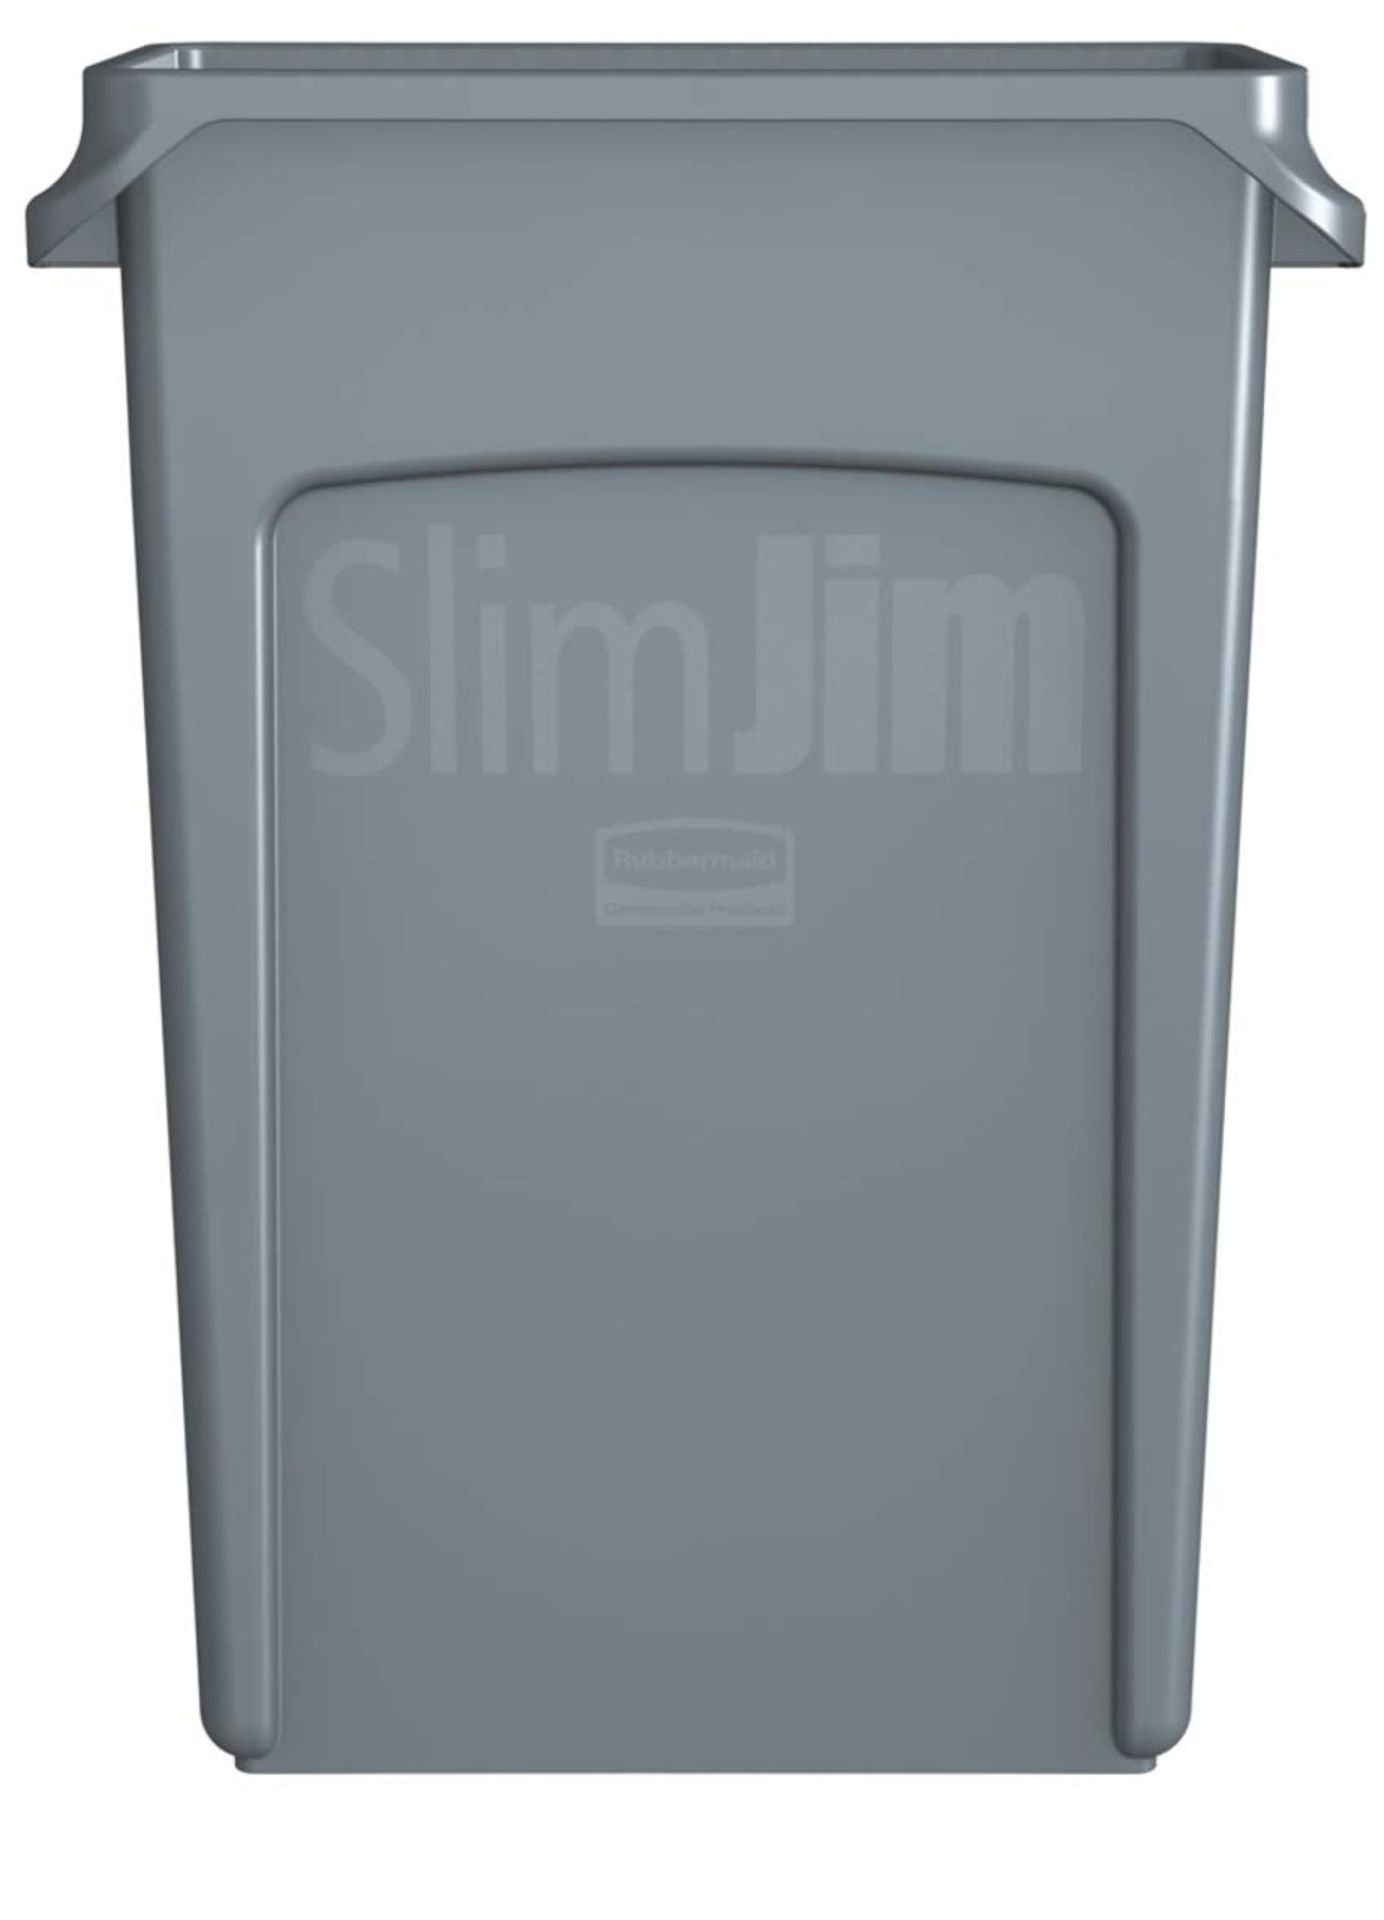 1 x Rubbermaid Slim Jim Waste Bin With Venting Channels Colour: Grey - Type: FG354060 - Brand New - Image 5 of 5